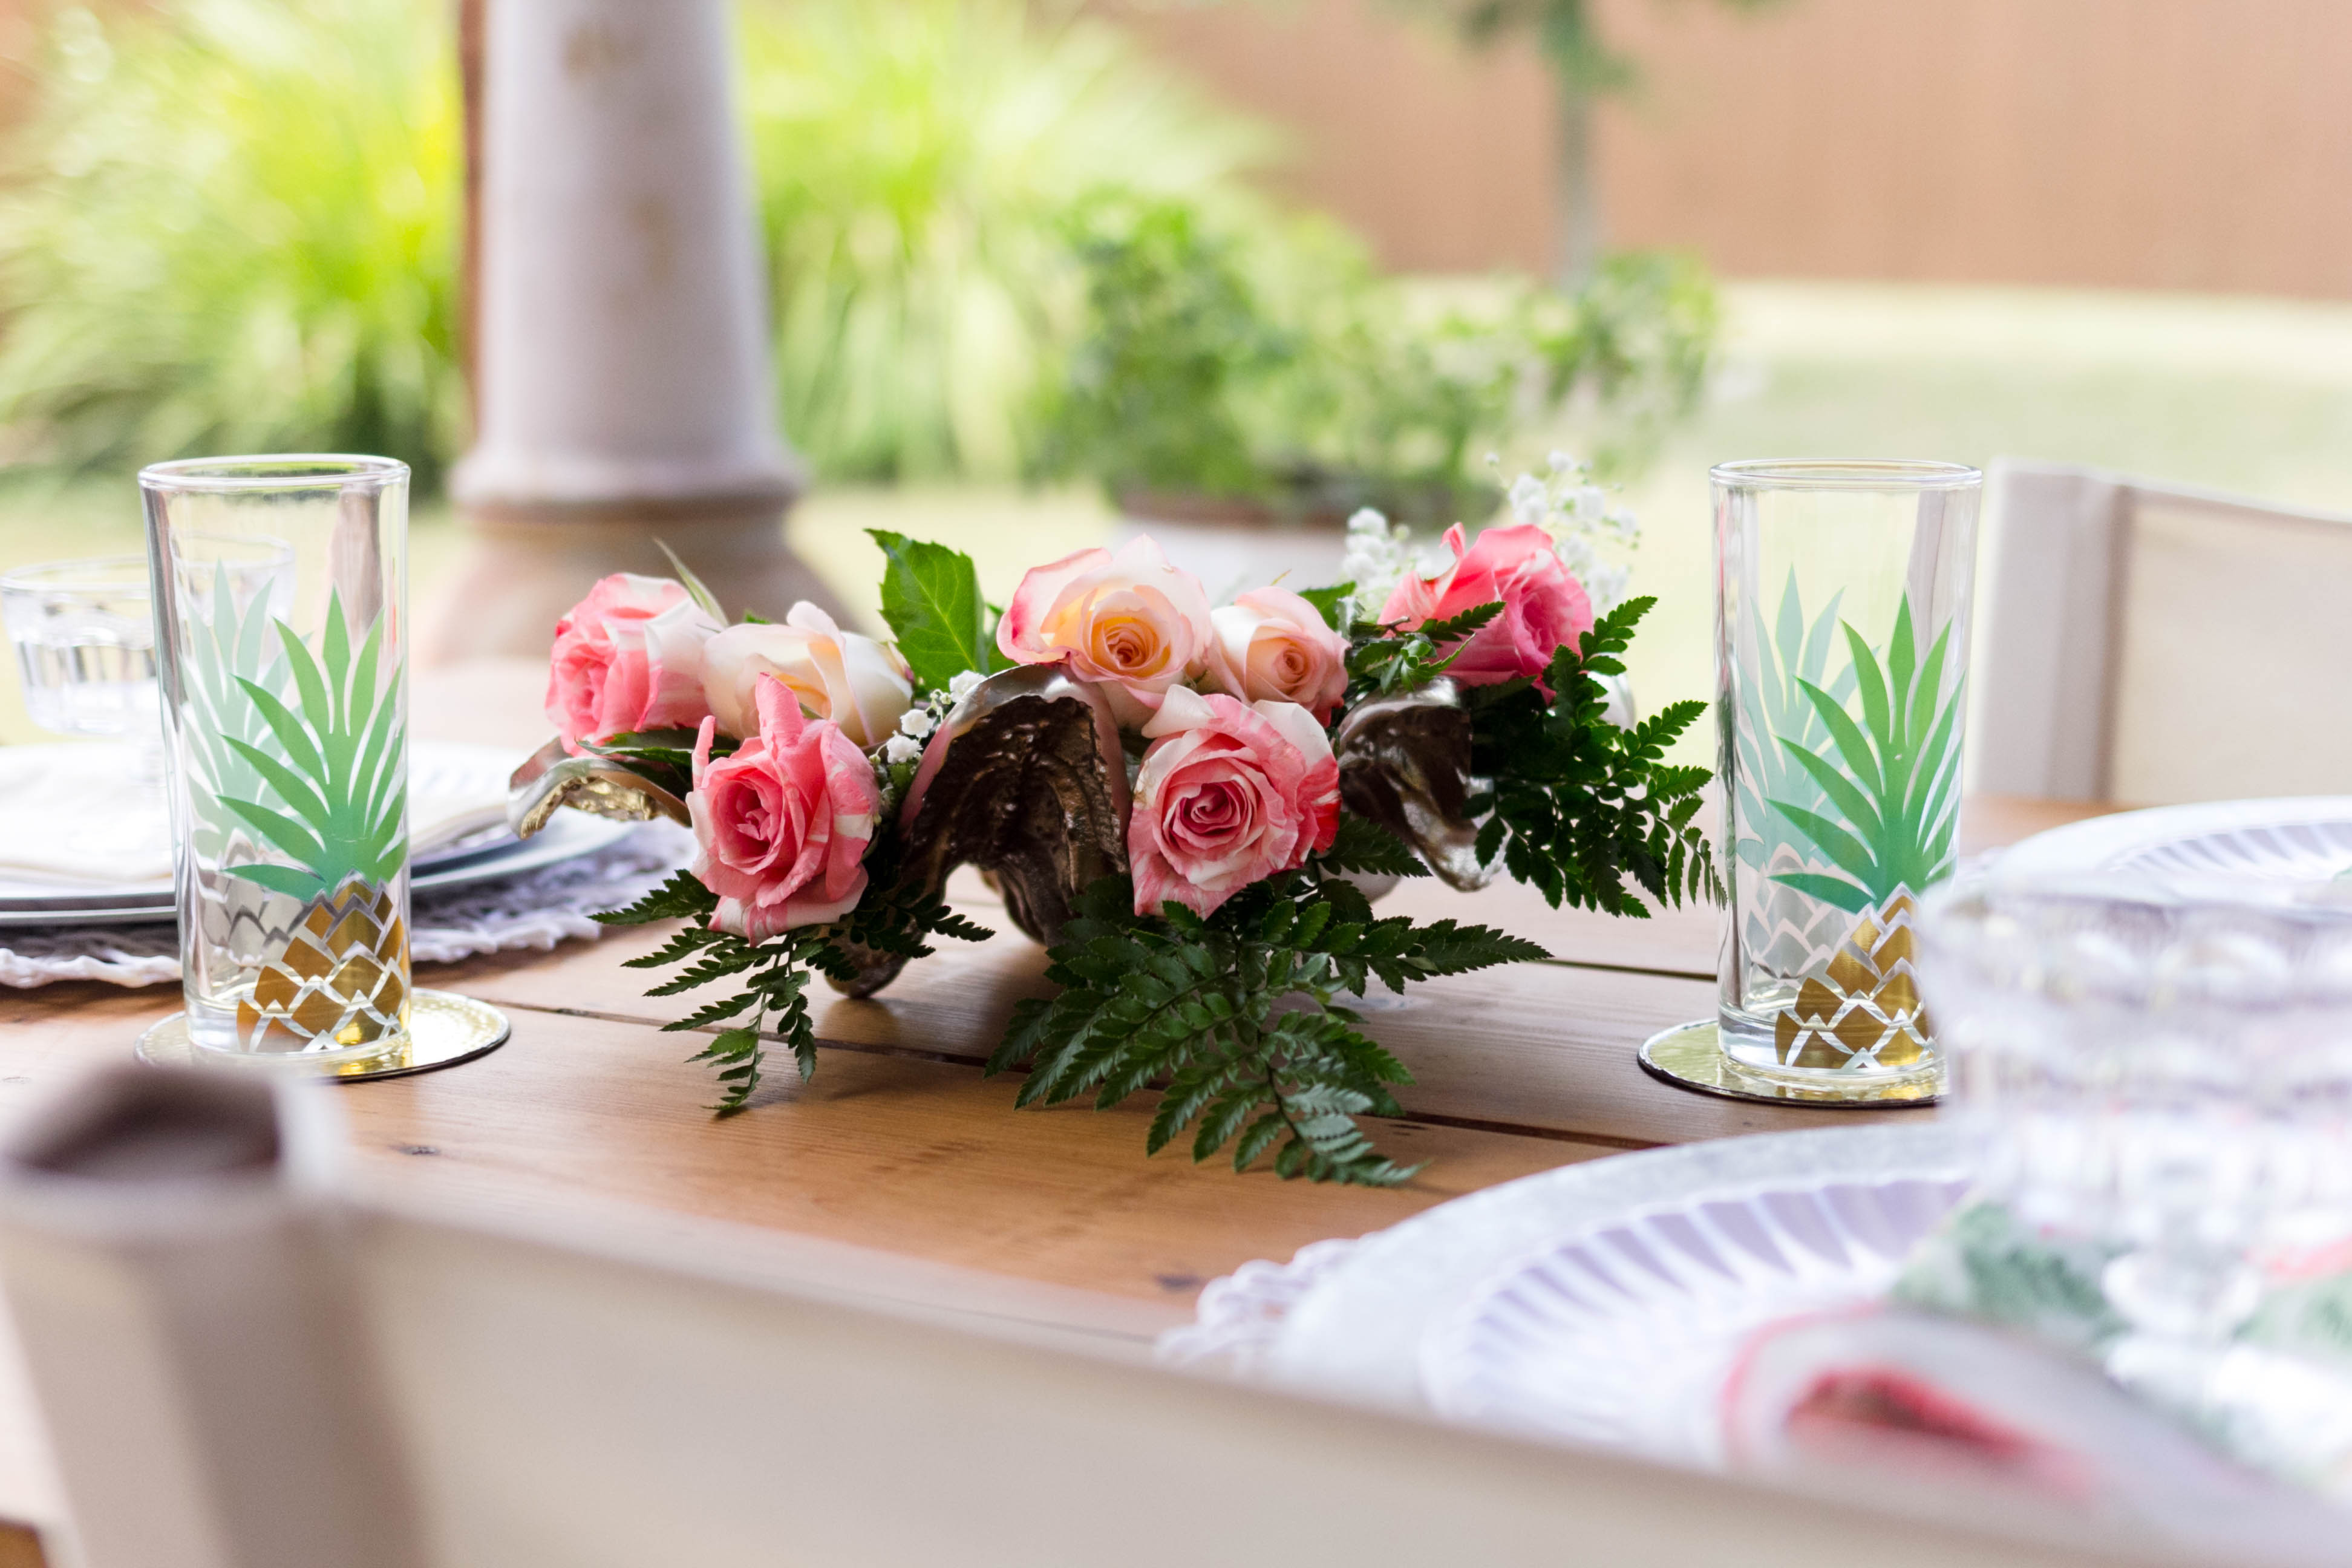 Roses Outdoor Floral Display Tablescape